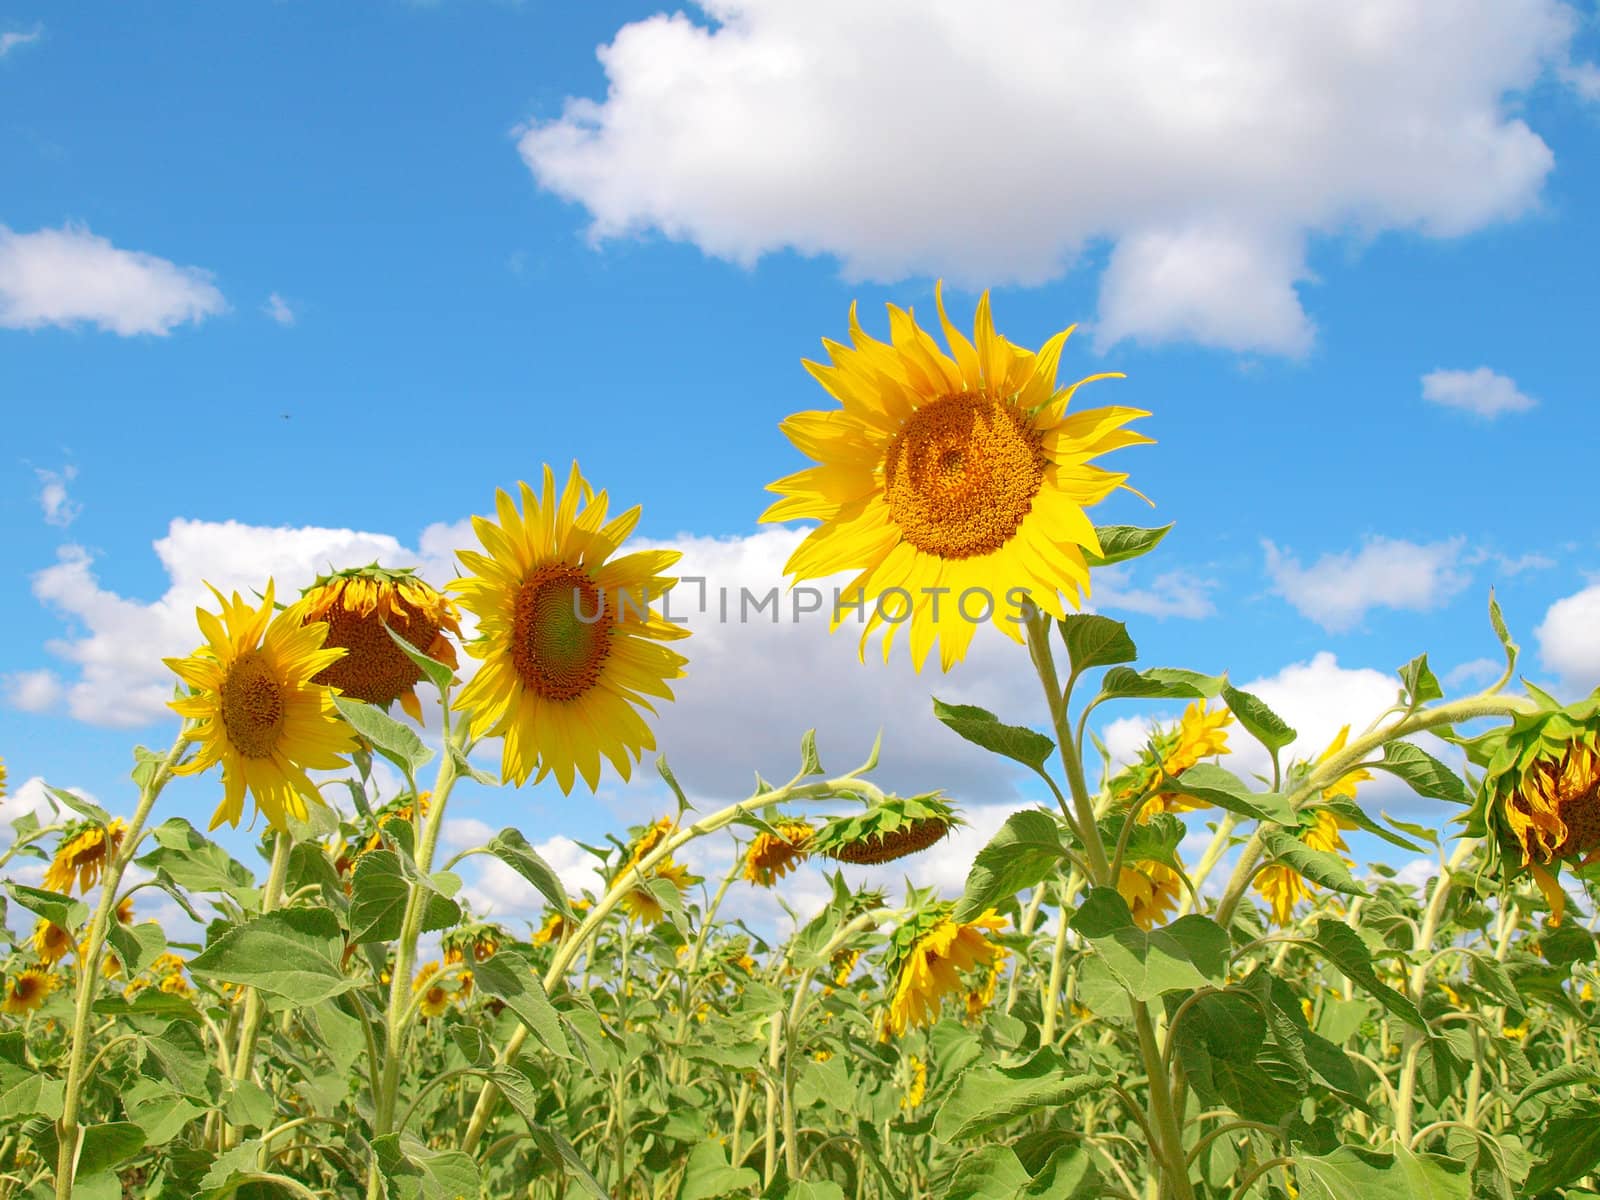 Sunflowers over blue sky with clouds by sergpet